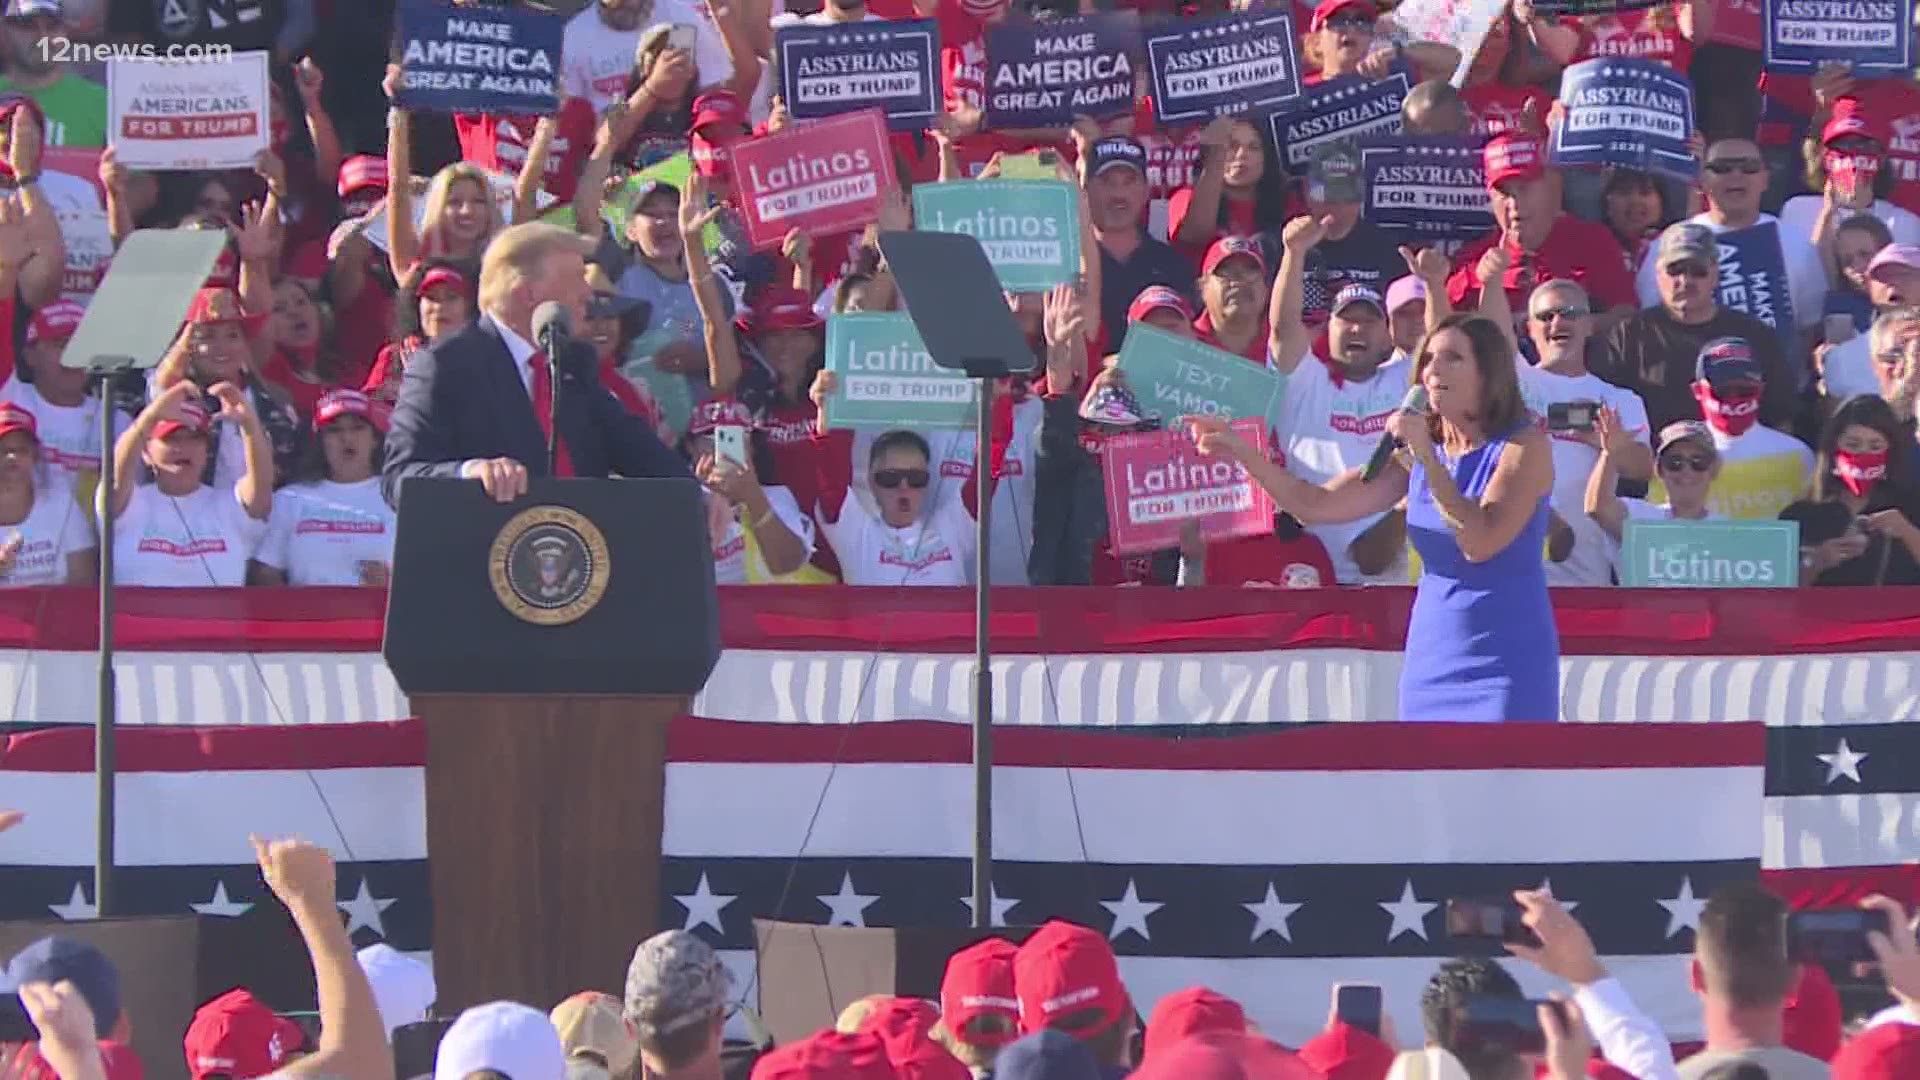 President Trump gave his points for reelection and called Sen. Martha McSally to give her speech within a minute.